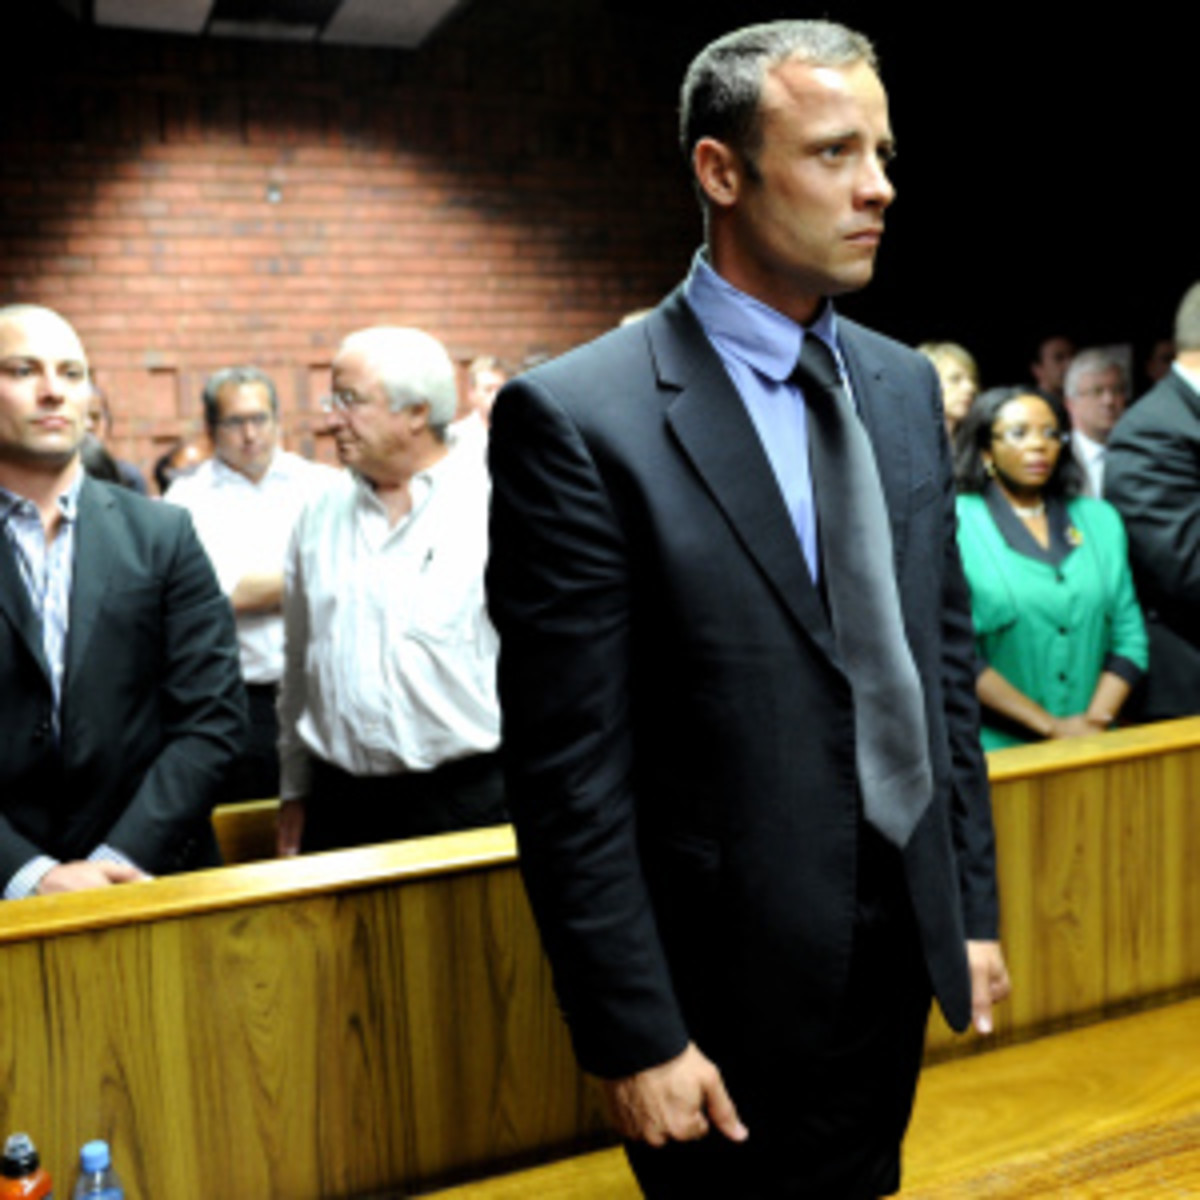 Oscar Pistorius has been dropped by a number of sponsors. (Stephane de Sakutin/Getty Images)